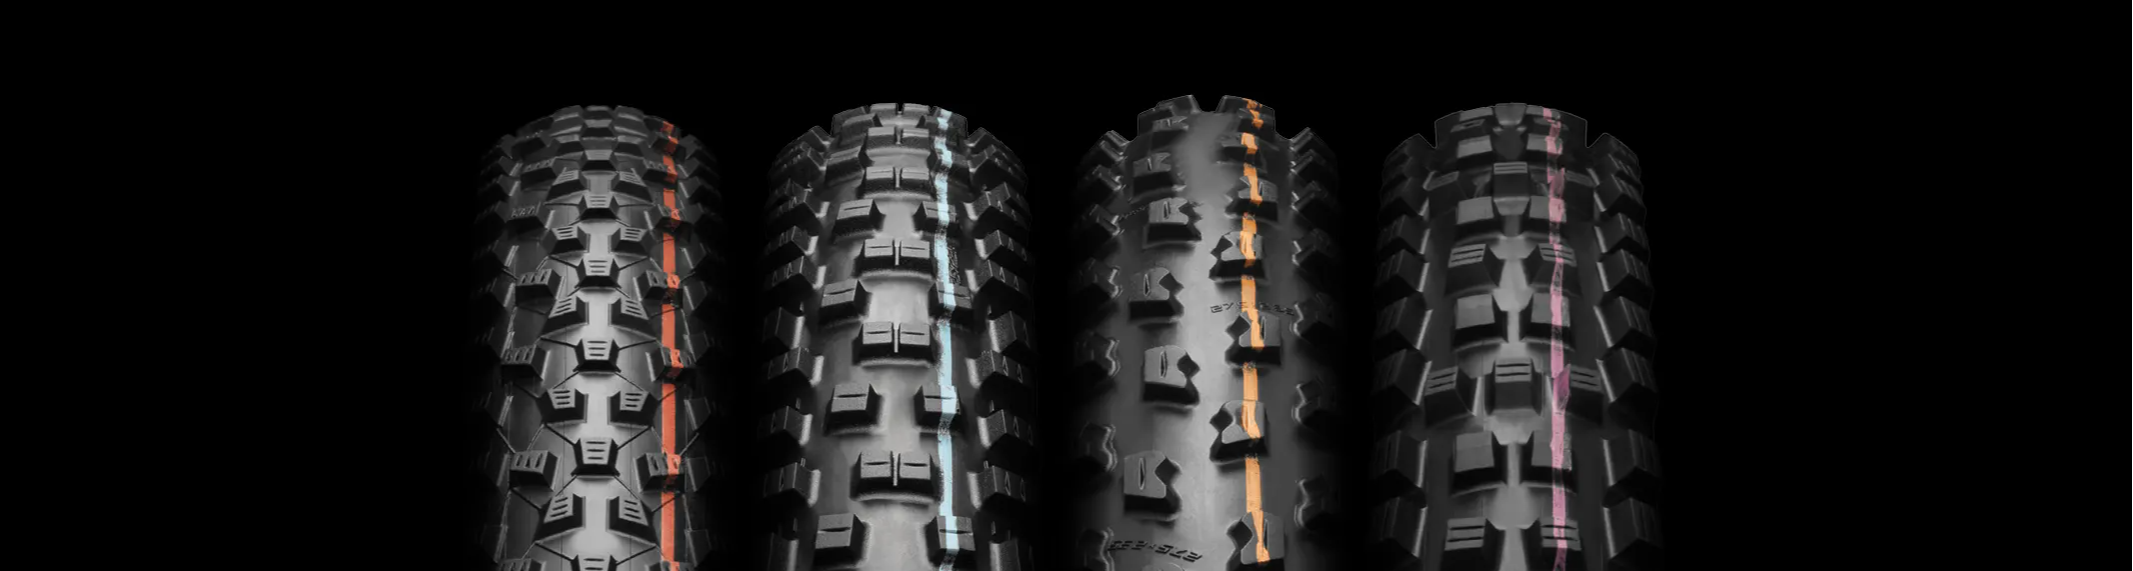 Schwalbe Addix tire compounds speed speedgrip soft and ultrasoft on a black background